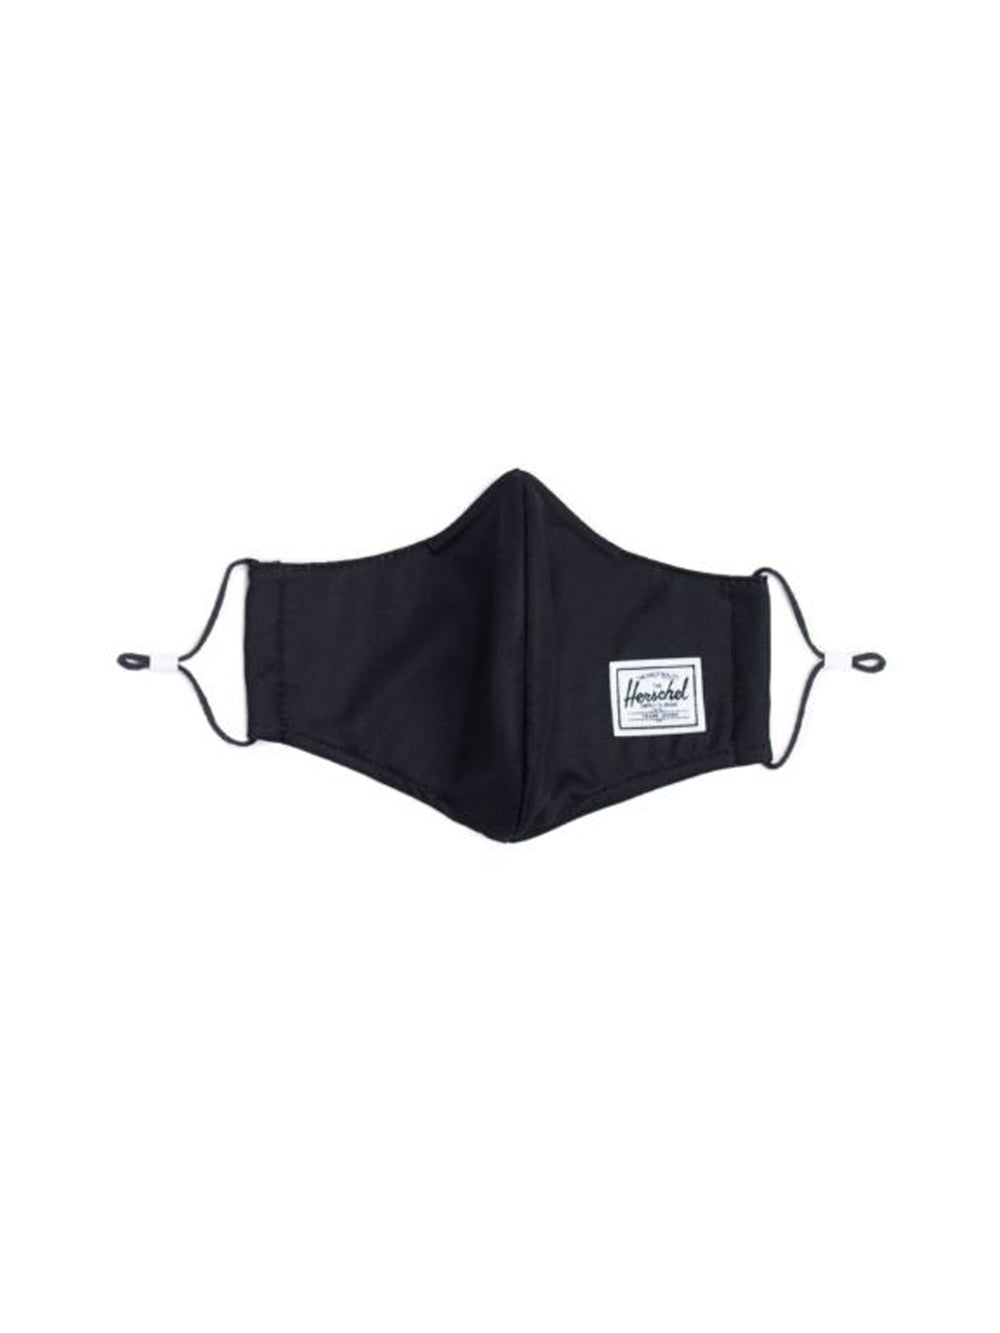 HERSCHEL SUPPLY CO. CLASSIC FITTED FACE MASK - BLACK - CLEARANCE